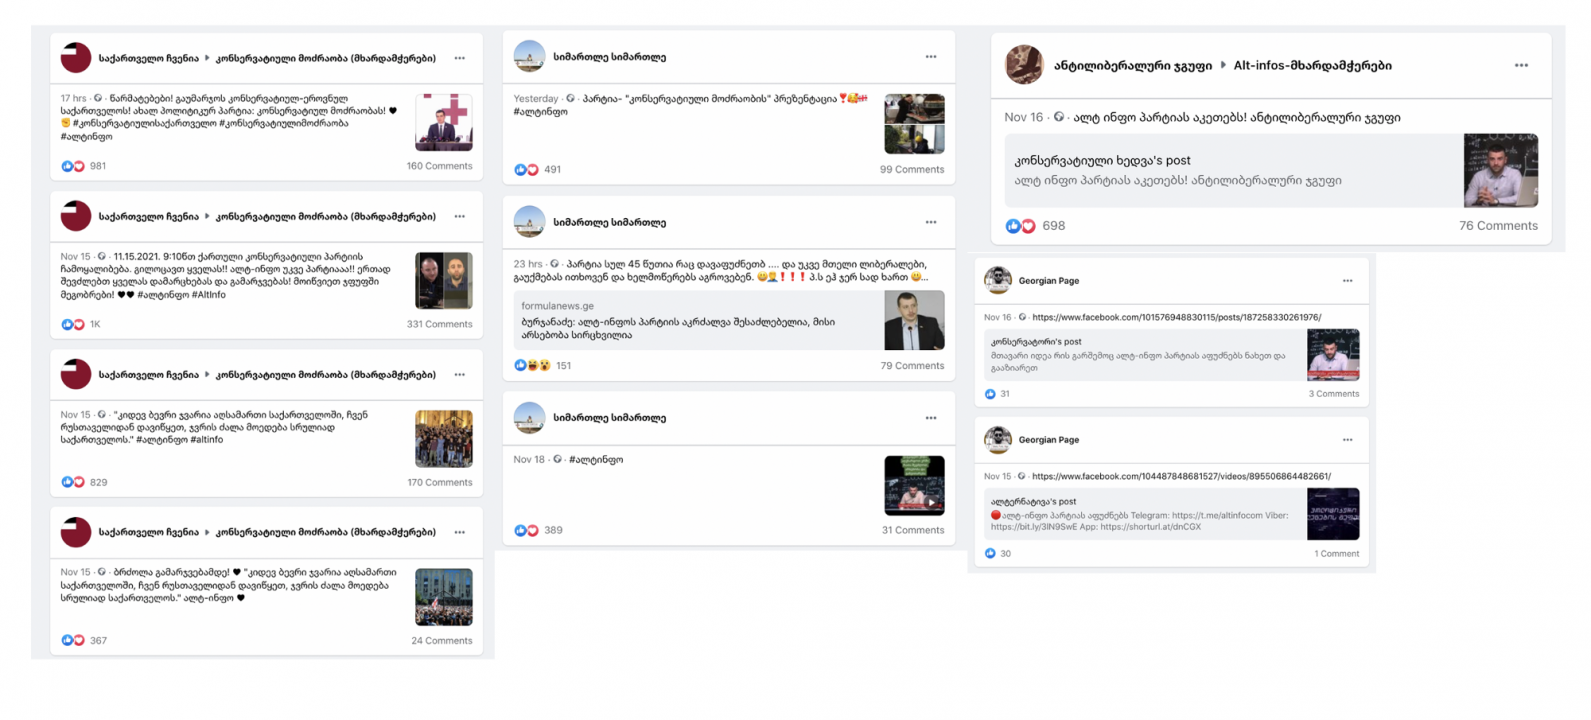 Screencaps from the user accounts designed to look like Facebook pages and that promoted Alt-Info’s new pro-Kremlin political party in various groups and on their own timelines.